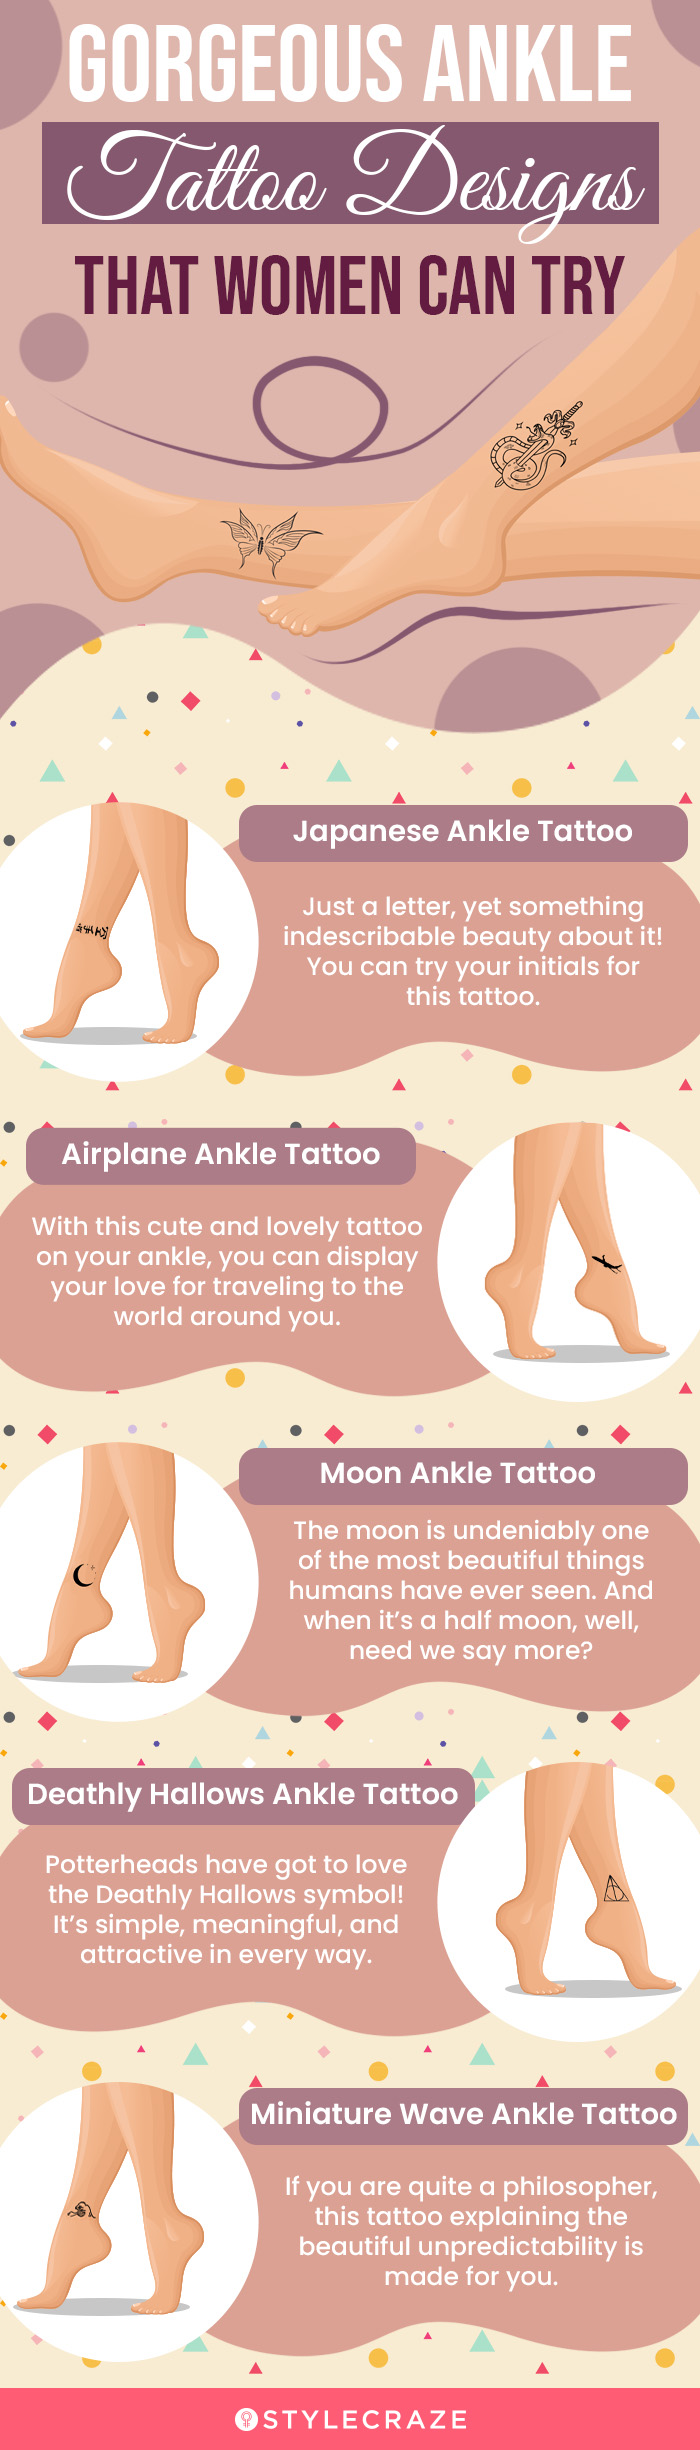 simple yet gorgeous ankle tattoo designs for women to try in 2022 [infographic]